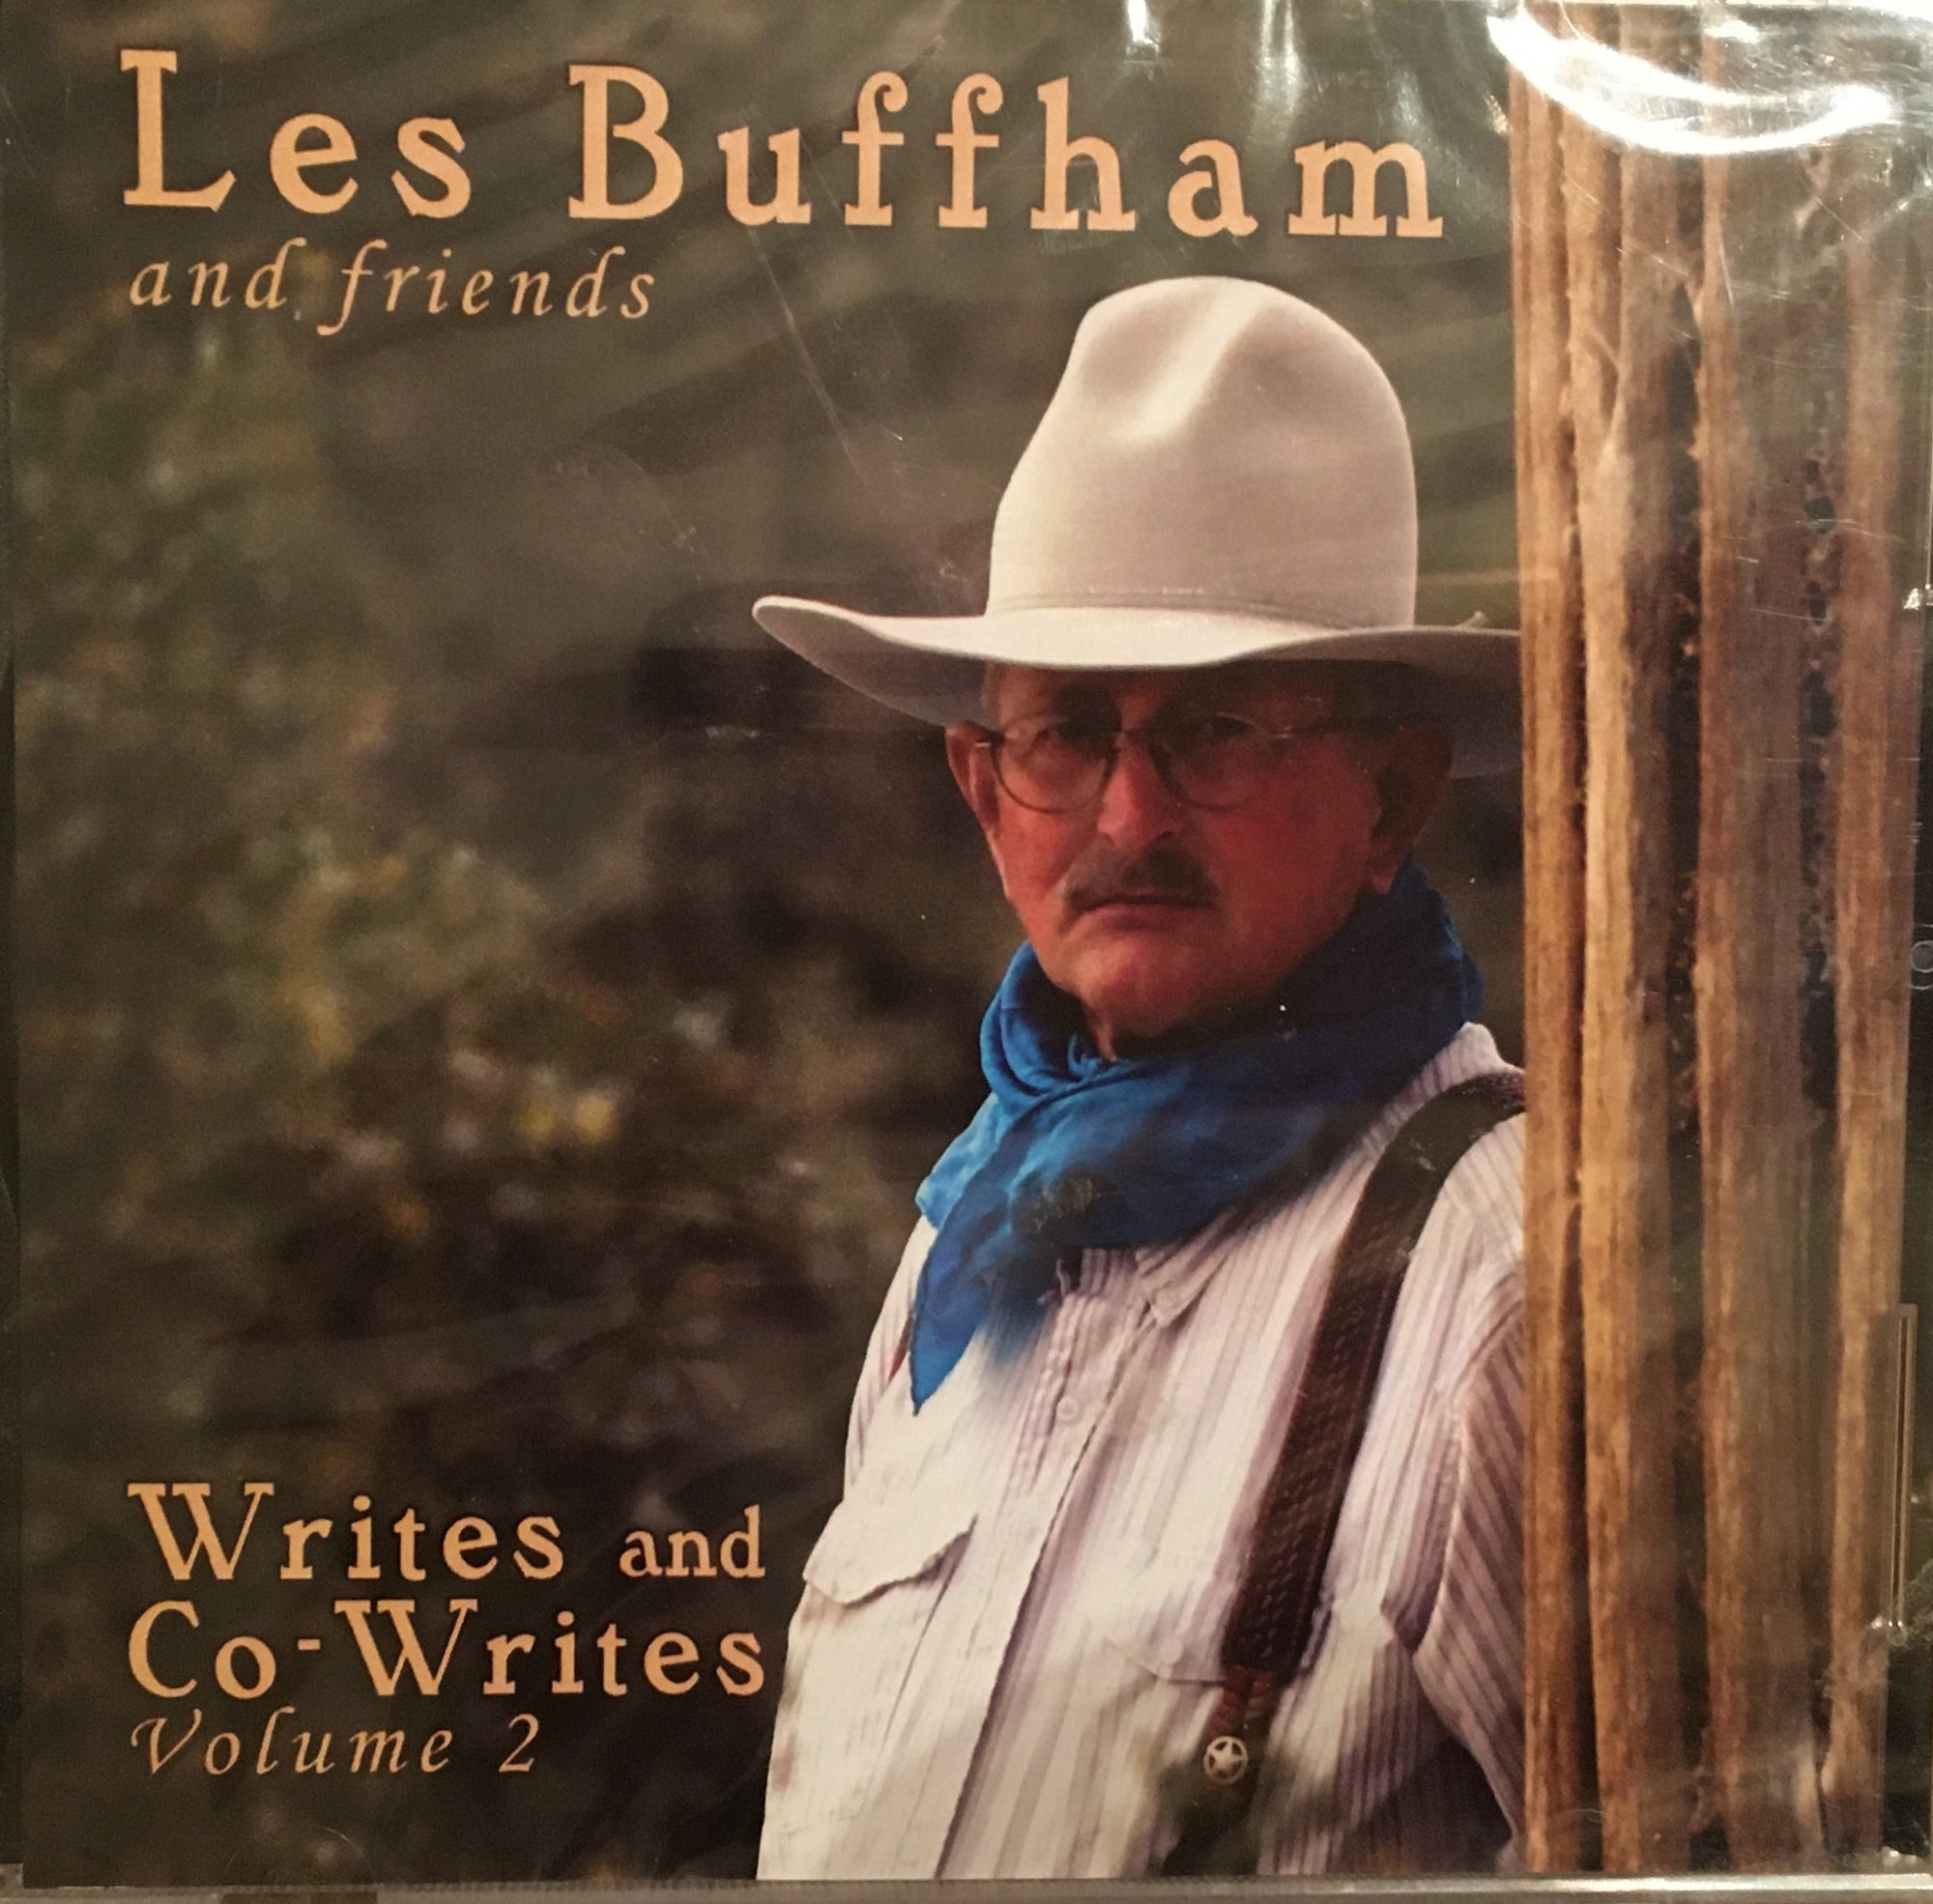 CD Writes and Co-Writes Volume 2 by Les Buffham and Friends